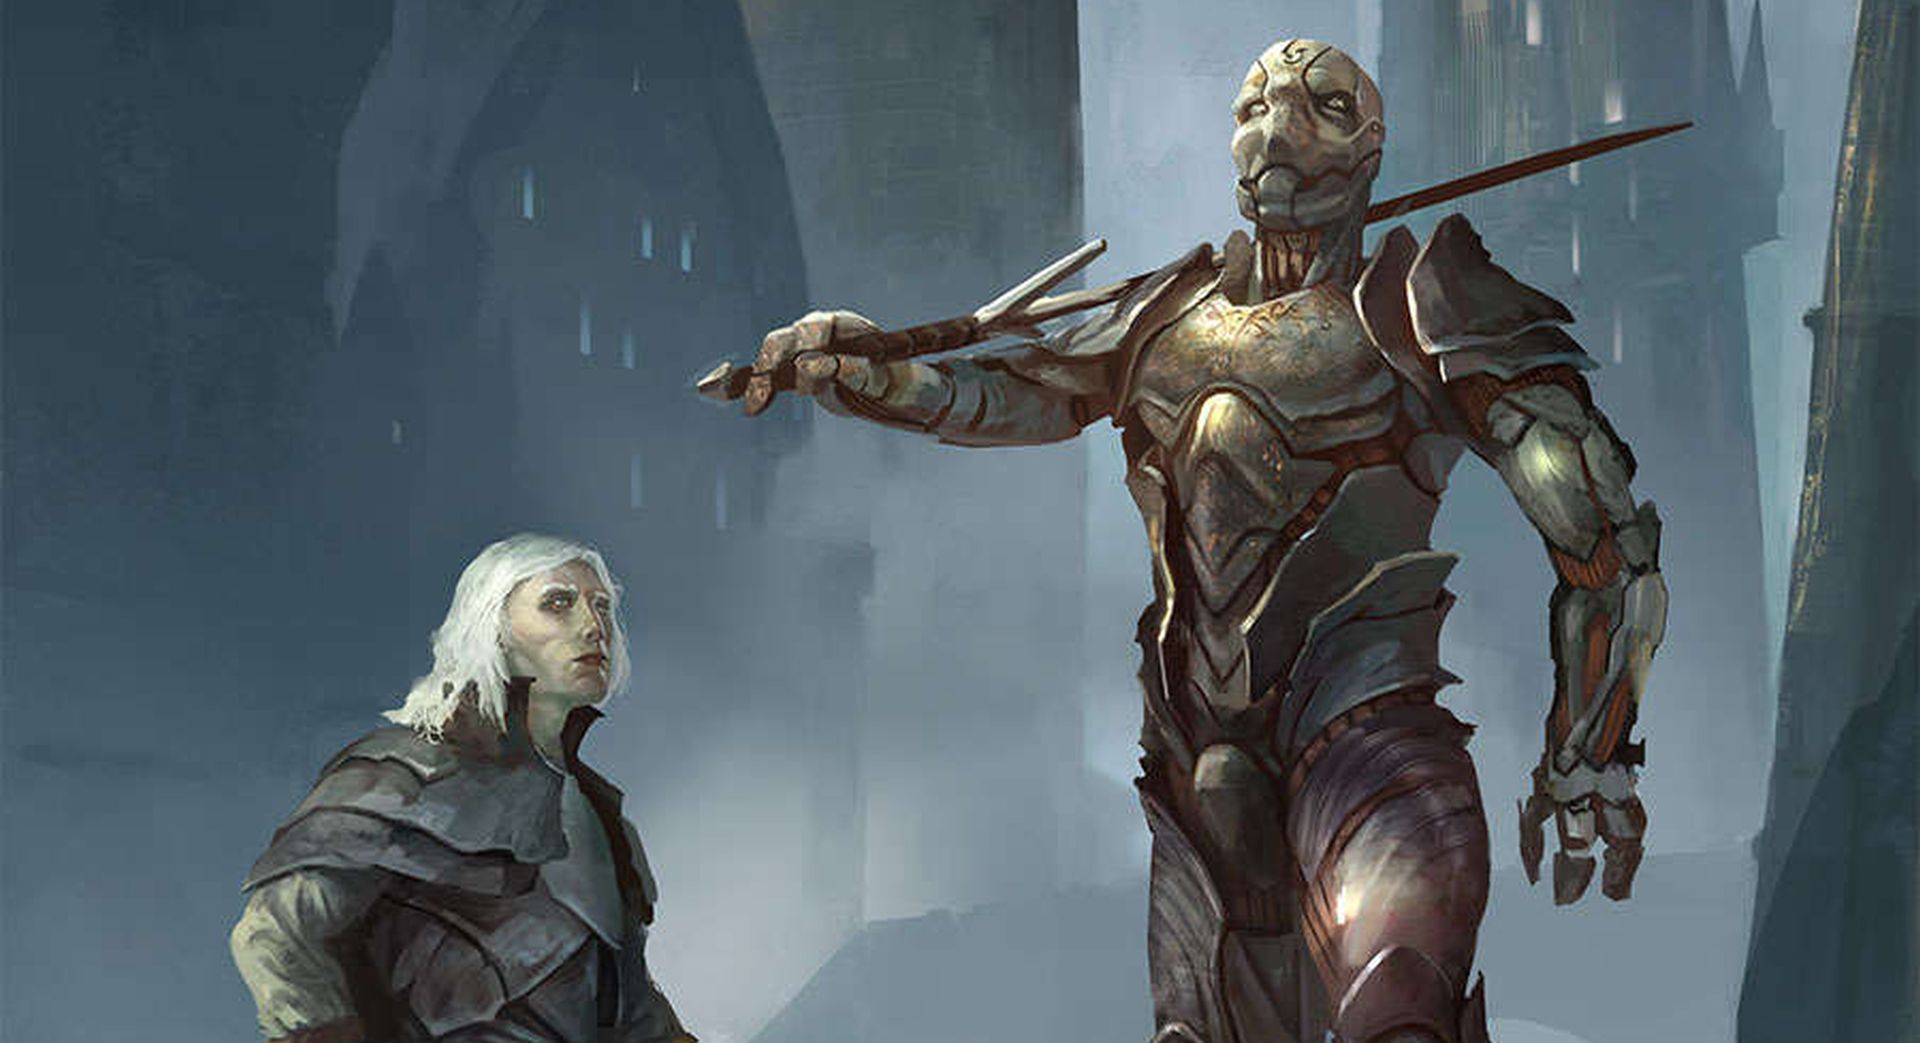 Expand Your Knowledge Of Eberron With This Dandd Supplement From Keith